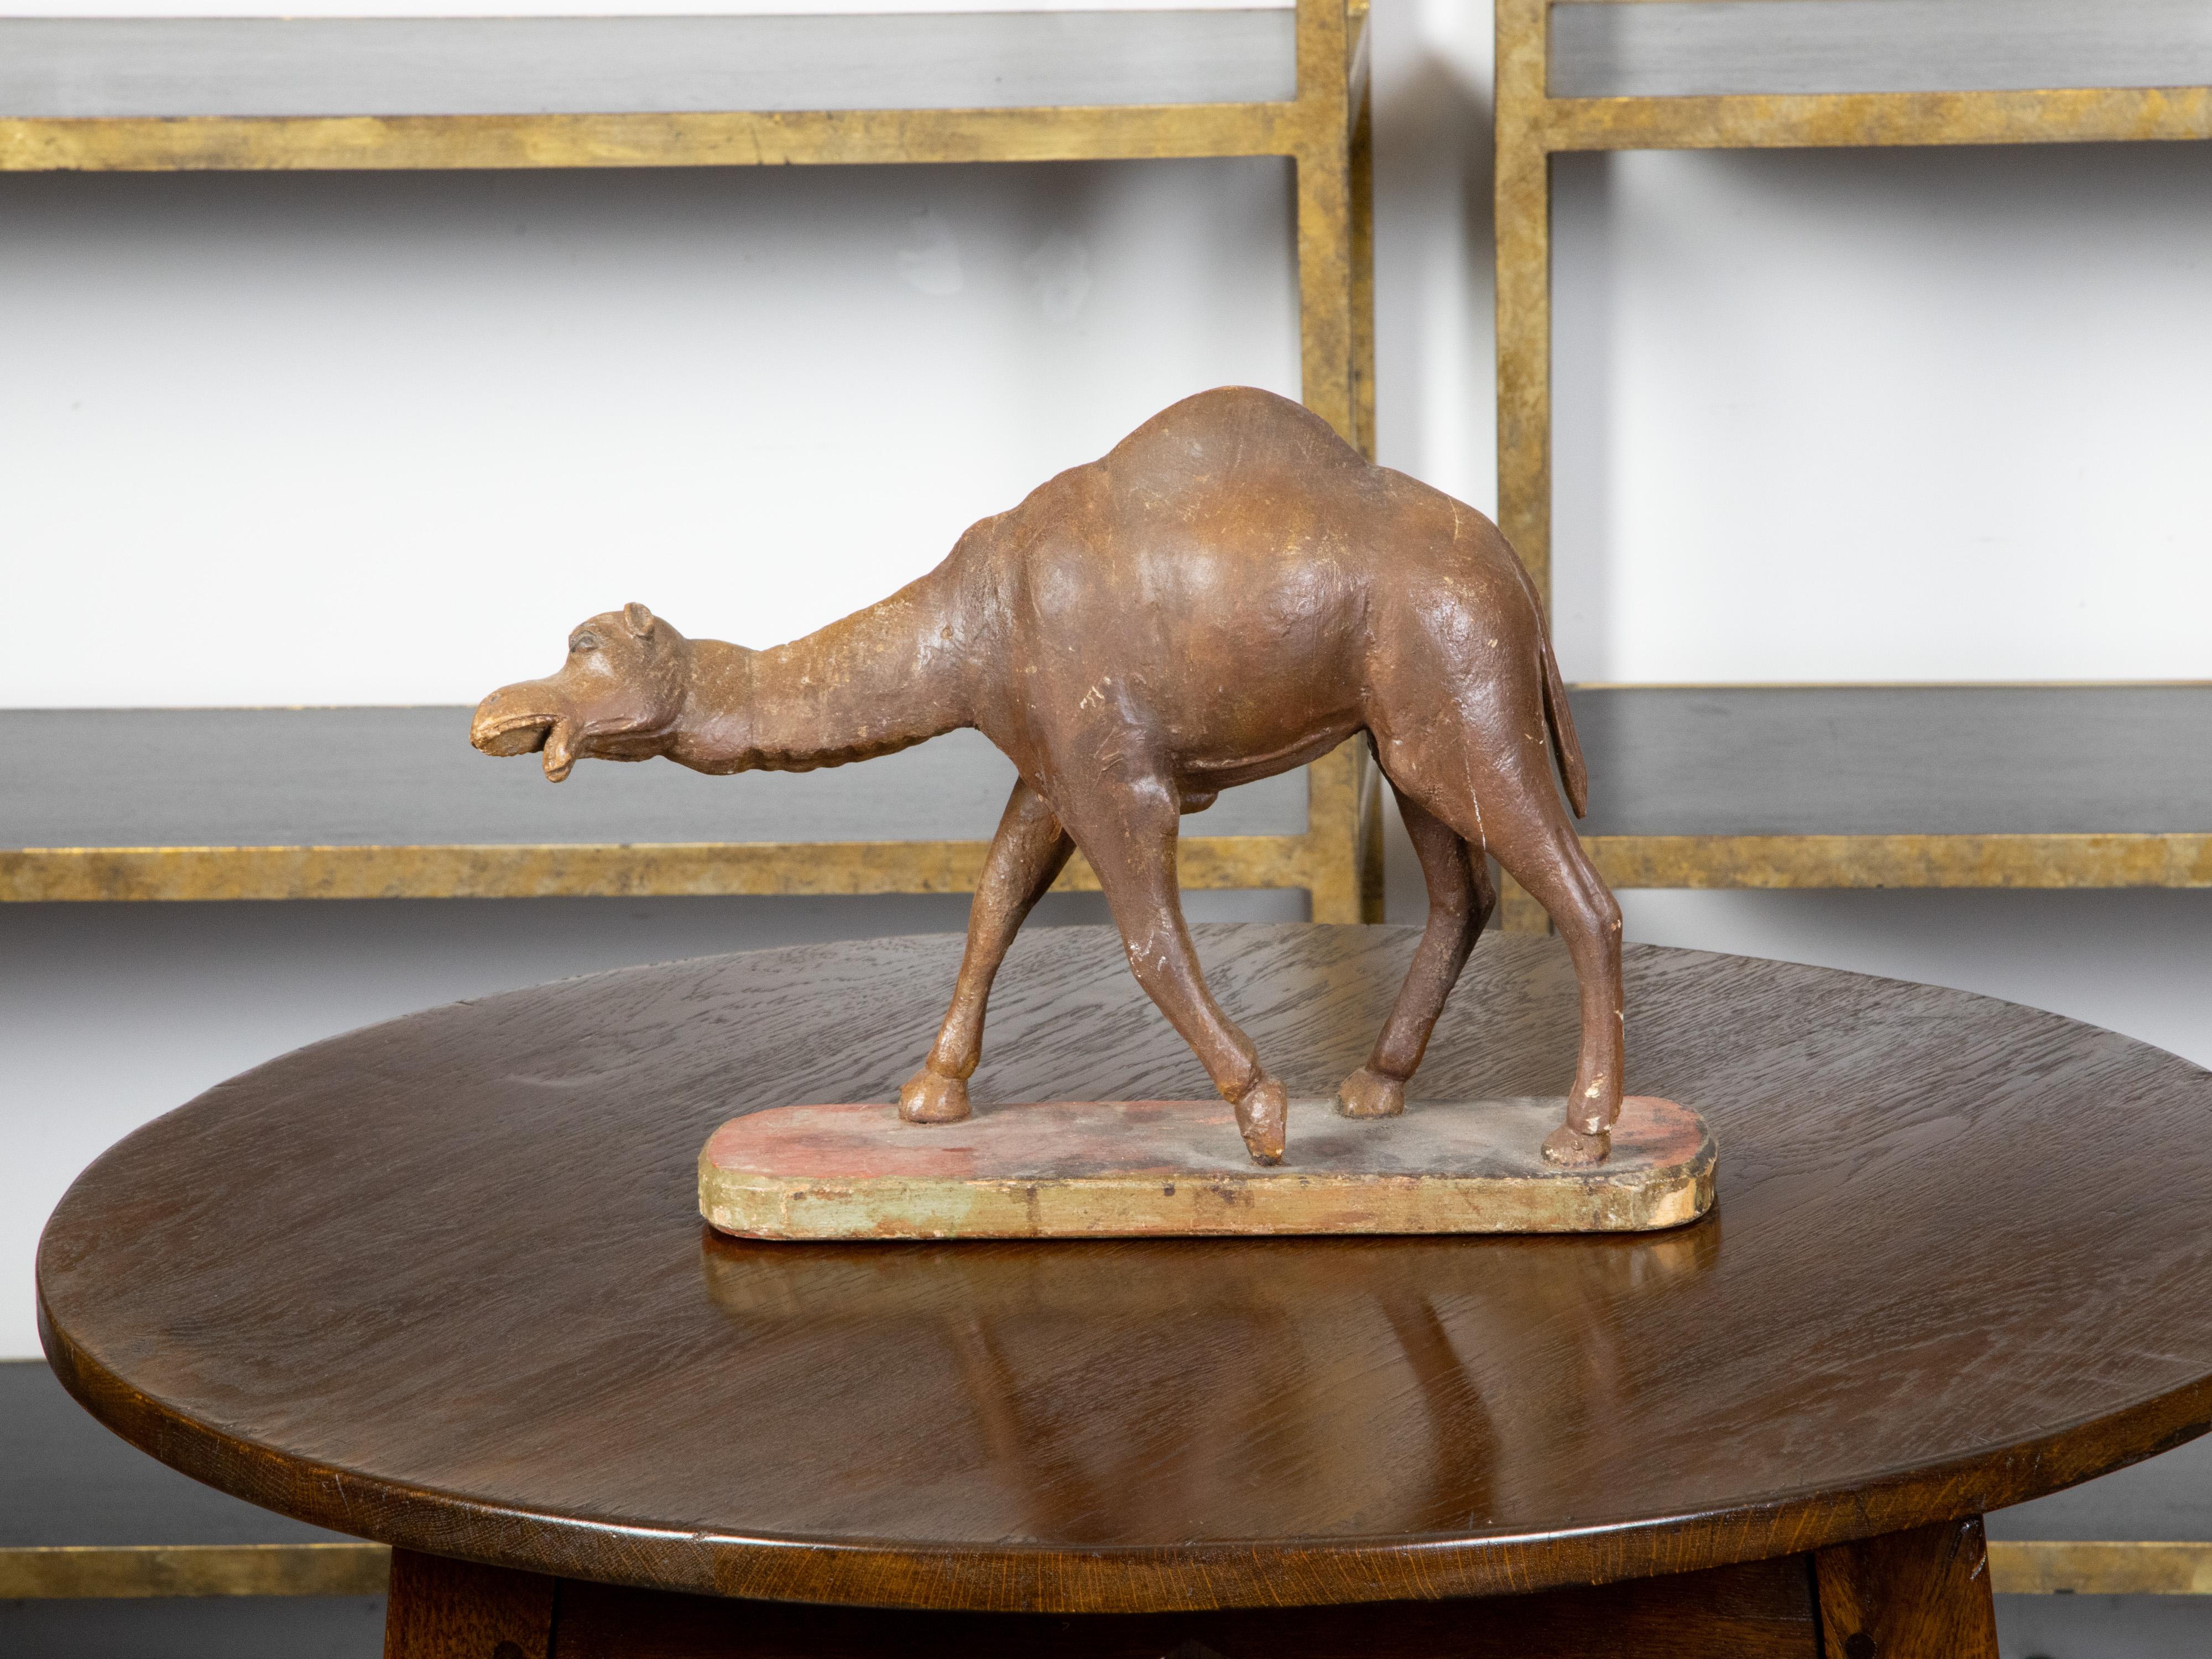 An Italian carved wooden camel from the 19th century, with oval painted base. Created in Italy during the 19th century, this carved wooden sculpture depicts a dromedary camel with single hump, standing on an oval painted base with red accents.